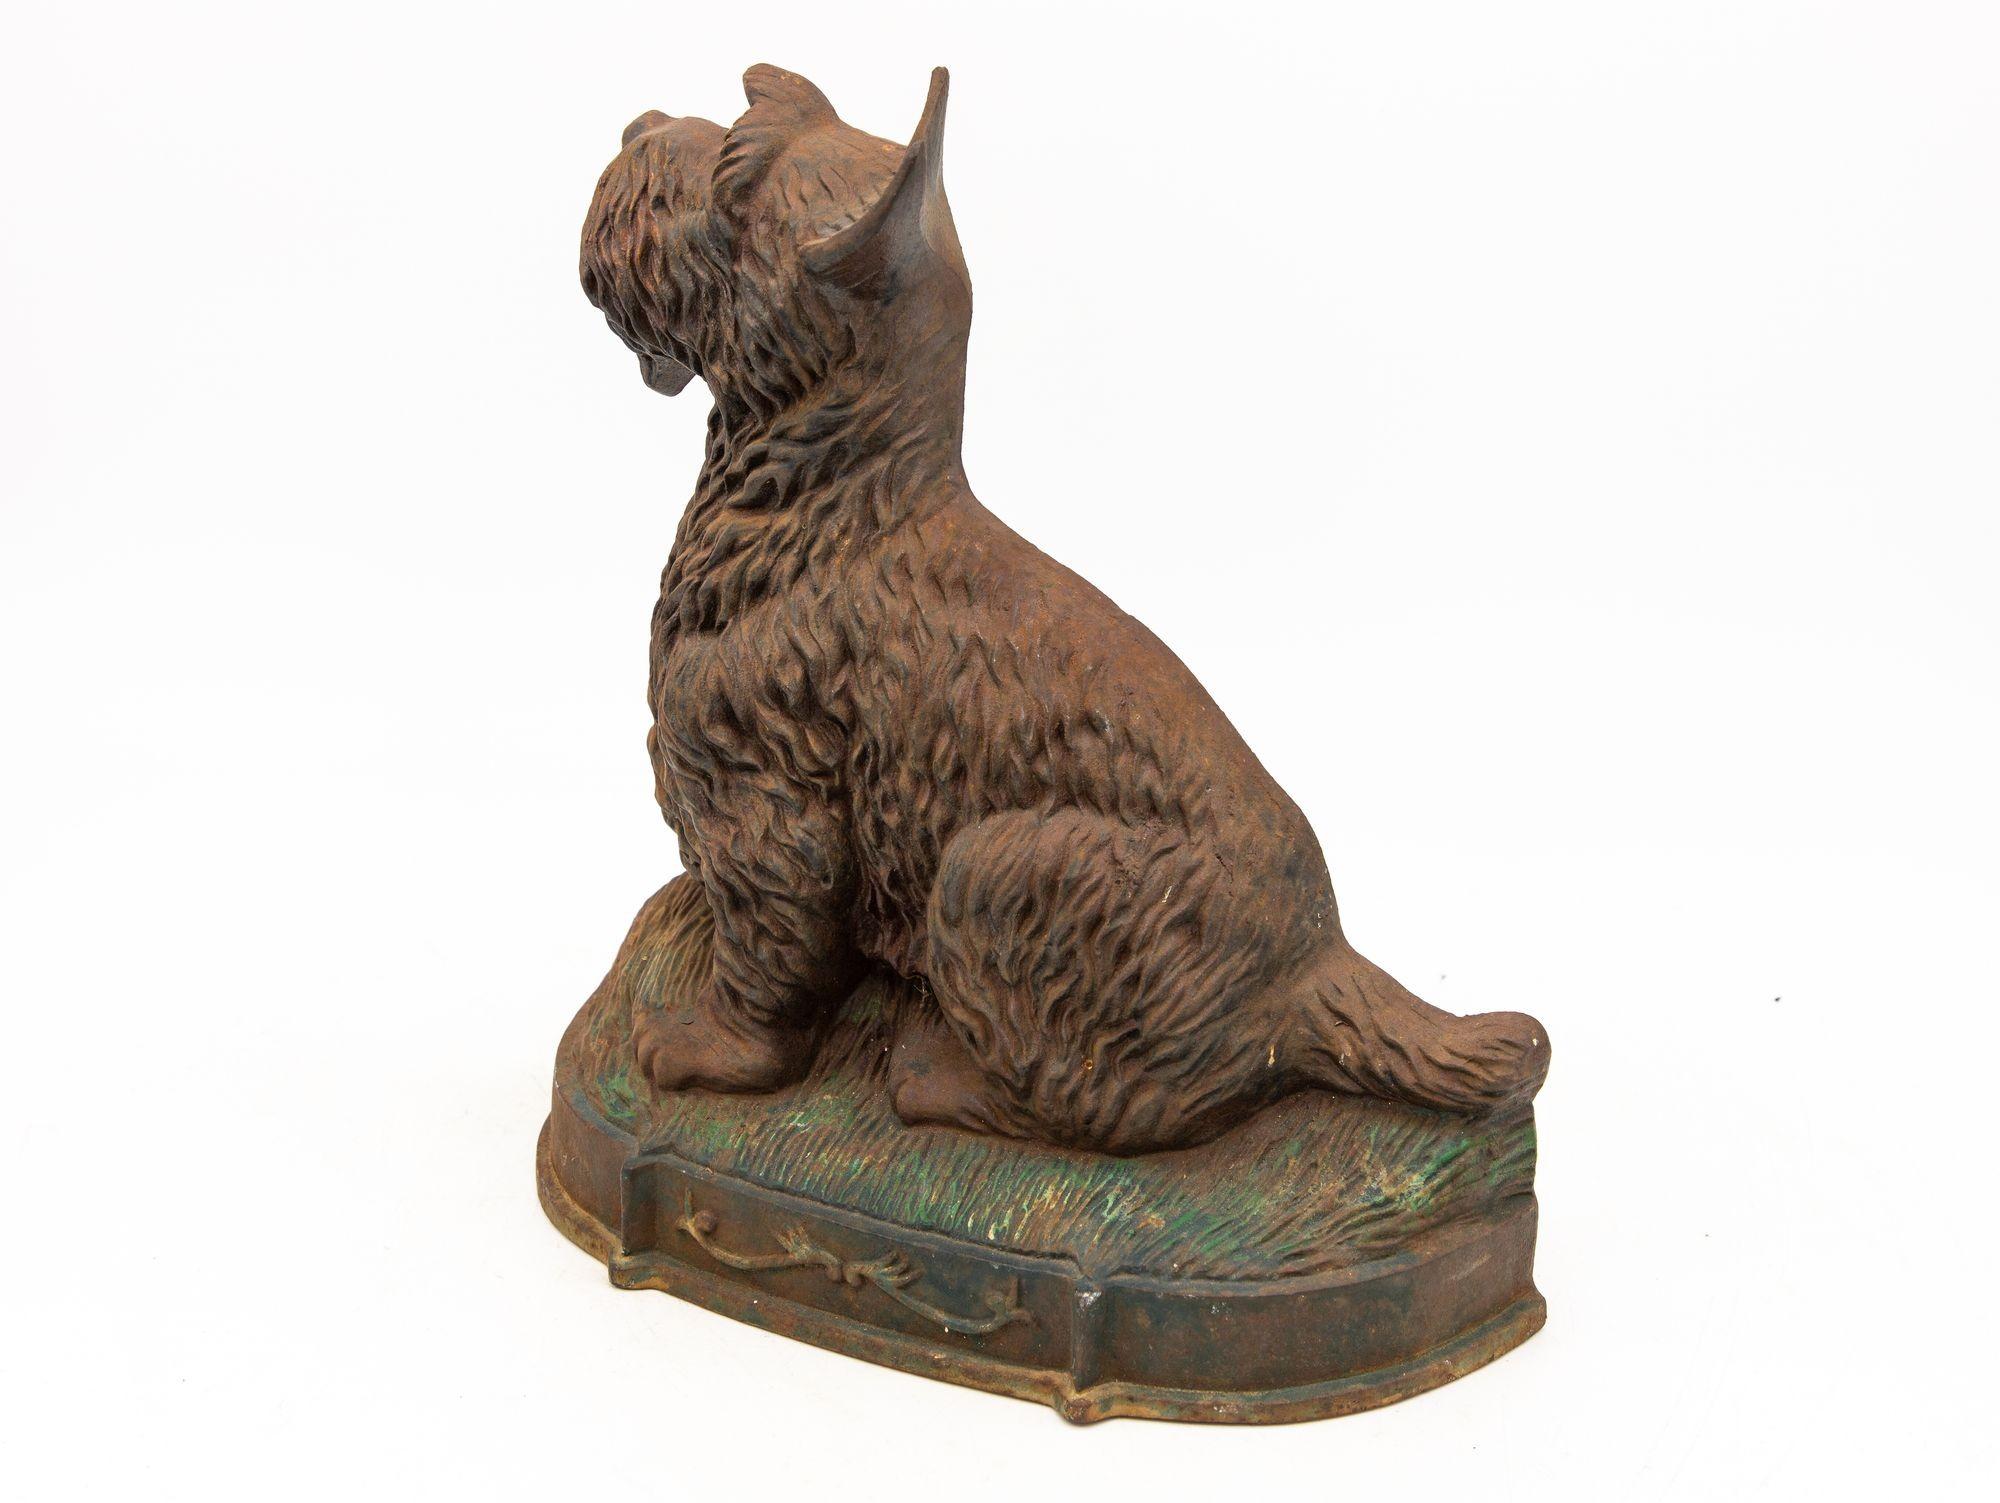 Crafted with exquisite detail, this English early 20th Century cast iron door stop is shaped like a charming Scottie dog, evoking a lifelike presence. The intricate design captures the essence of the Scottie breed, with its distinct coat texture,